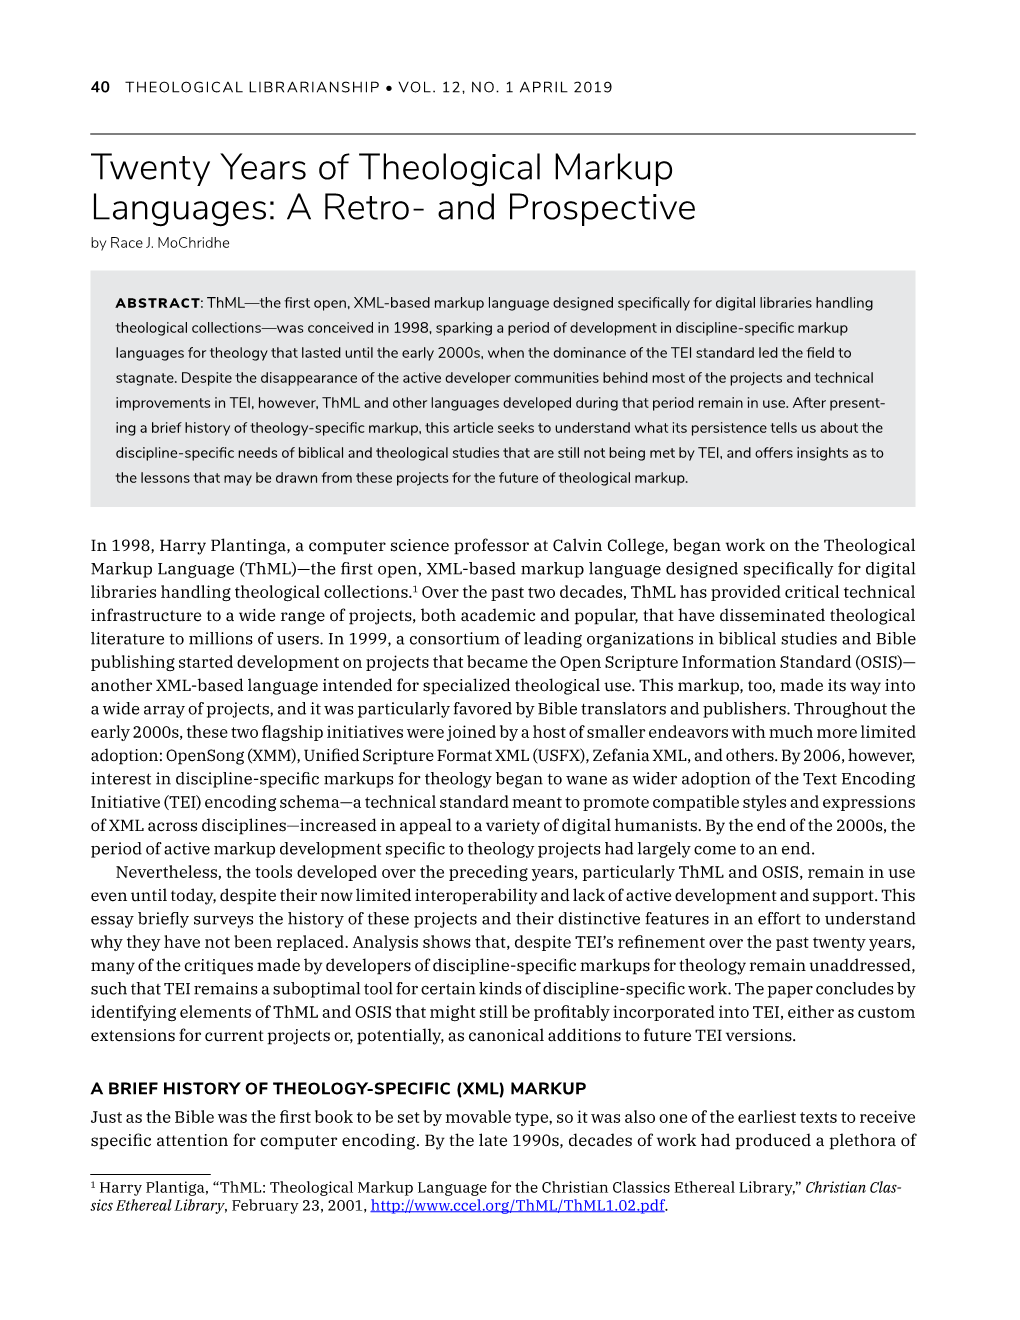 Twenty Years of Theological Markup Languages: a Retro- and Prospective by Race J